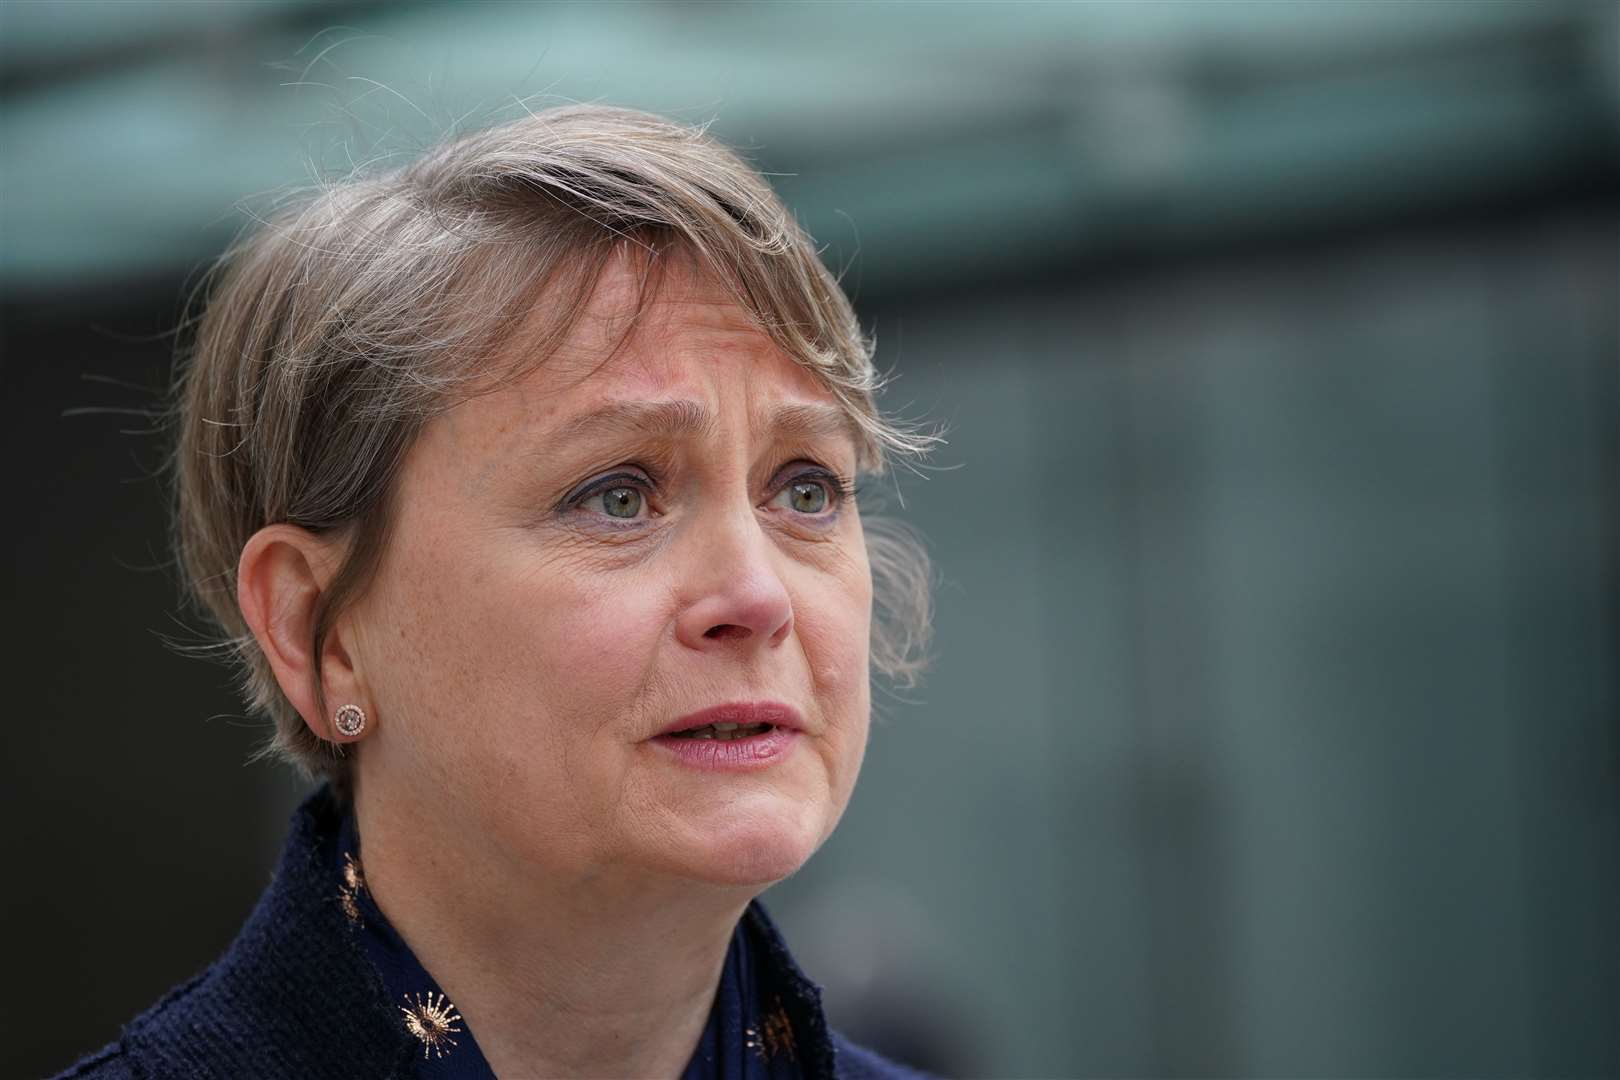 Yvette Cooper said progress has stalled in too many areas (Yui Mok/PA)